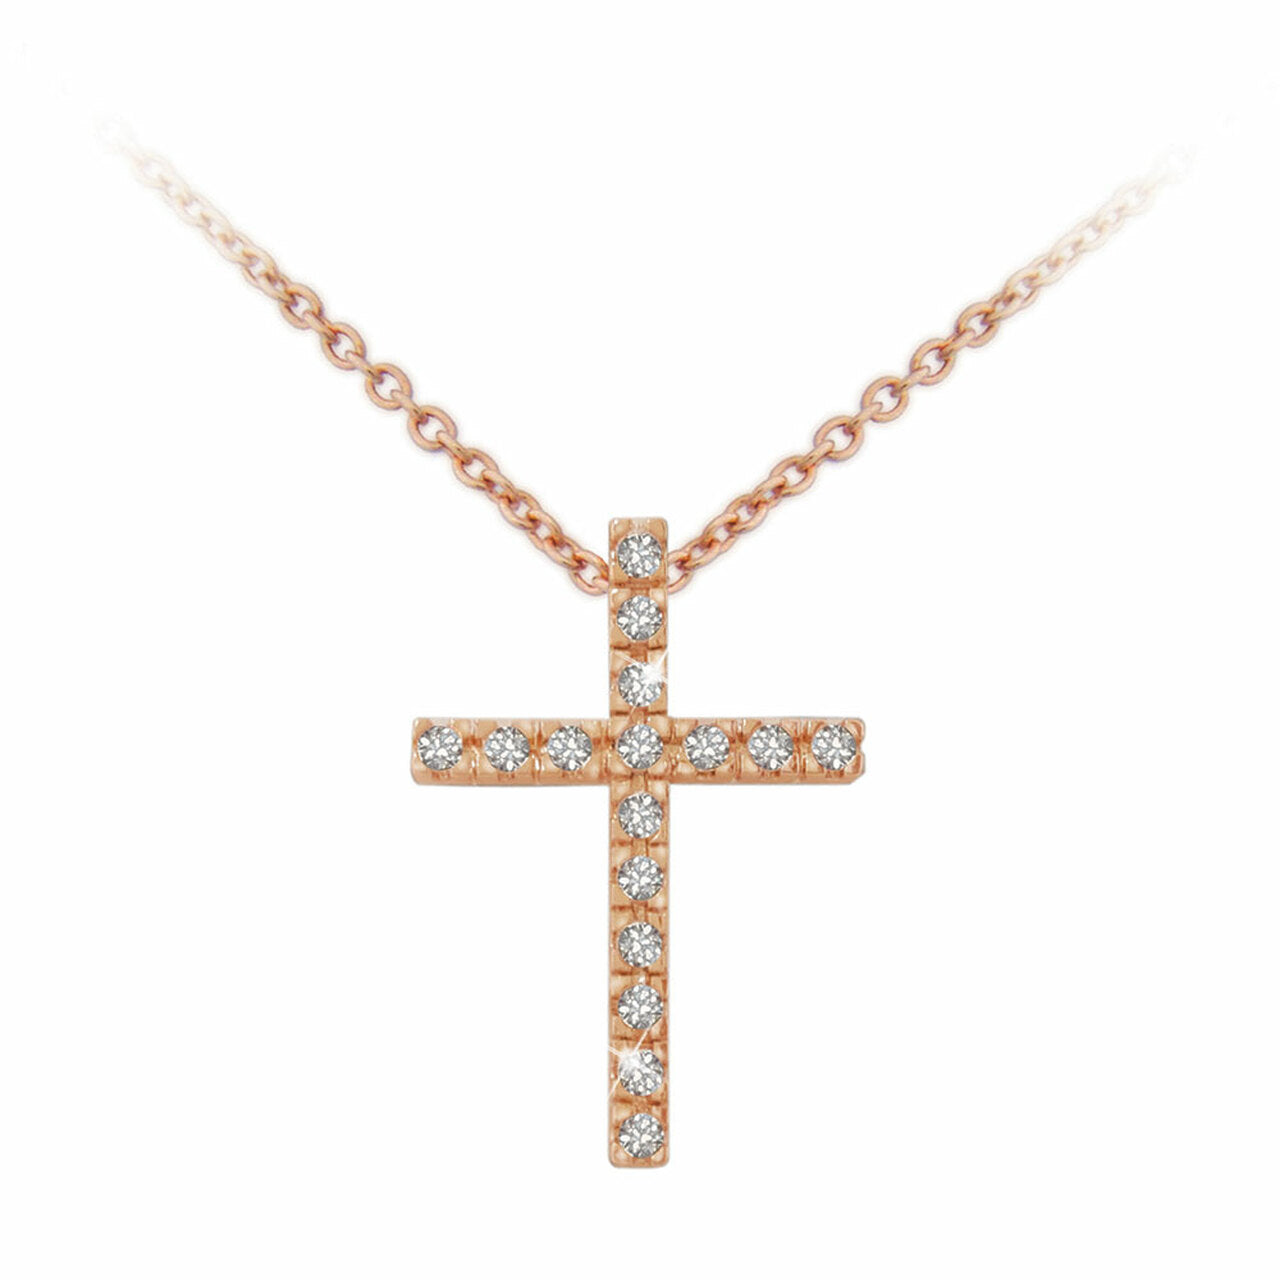 Tipperary Crystal Rose Gold Fine Cross Pendant  Expertly crafted in precious rose gold, this traditional cross is an elegantly subtle expression of faith. It is completely lined with a single row of glittering clear crystal accents. Each small crystal has been cut to add sparkle and brilliance to this simple yet symbolic pendant. The cross is finished with a polished shine and suspends freely along a rose gold cable chain which secures with a durable lobster claw clasp.